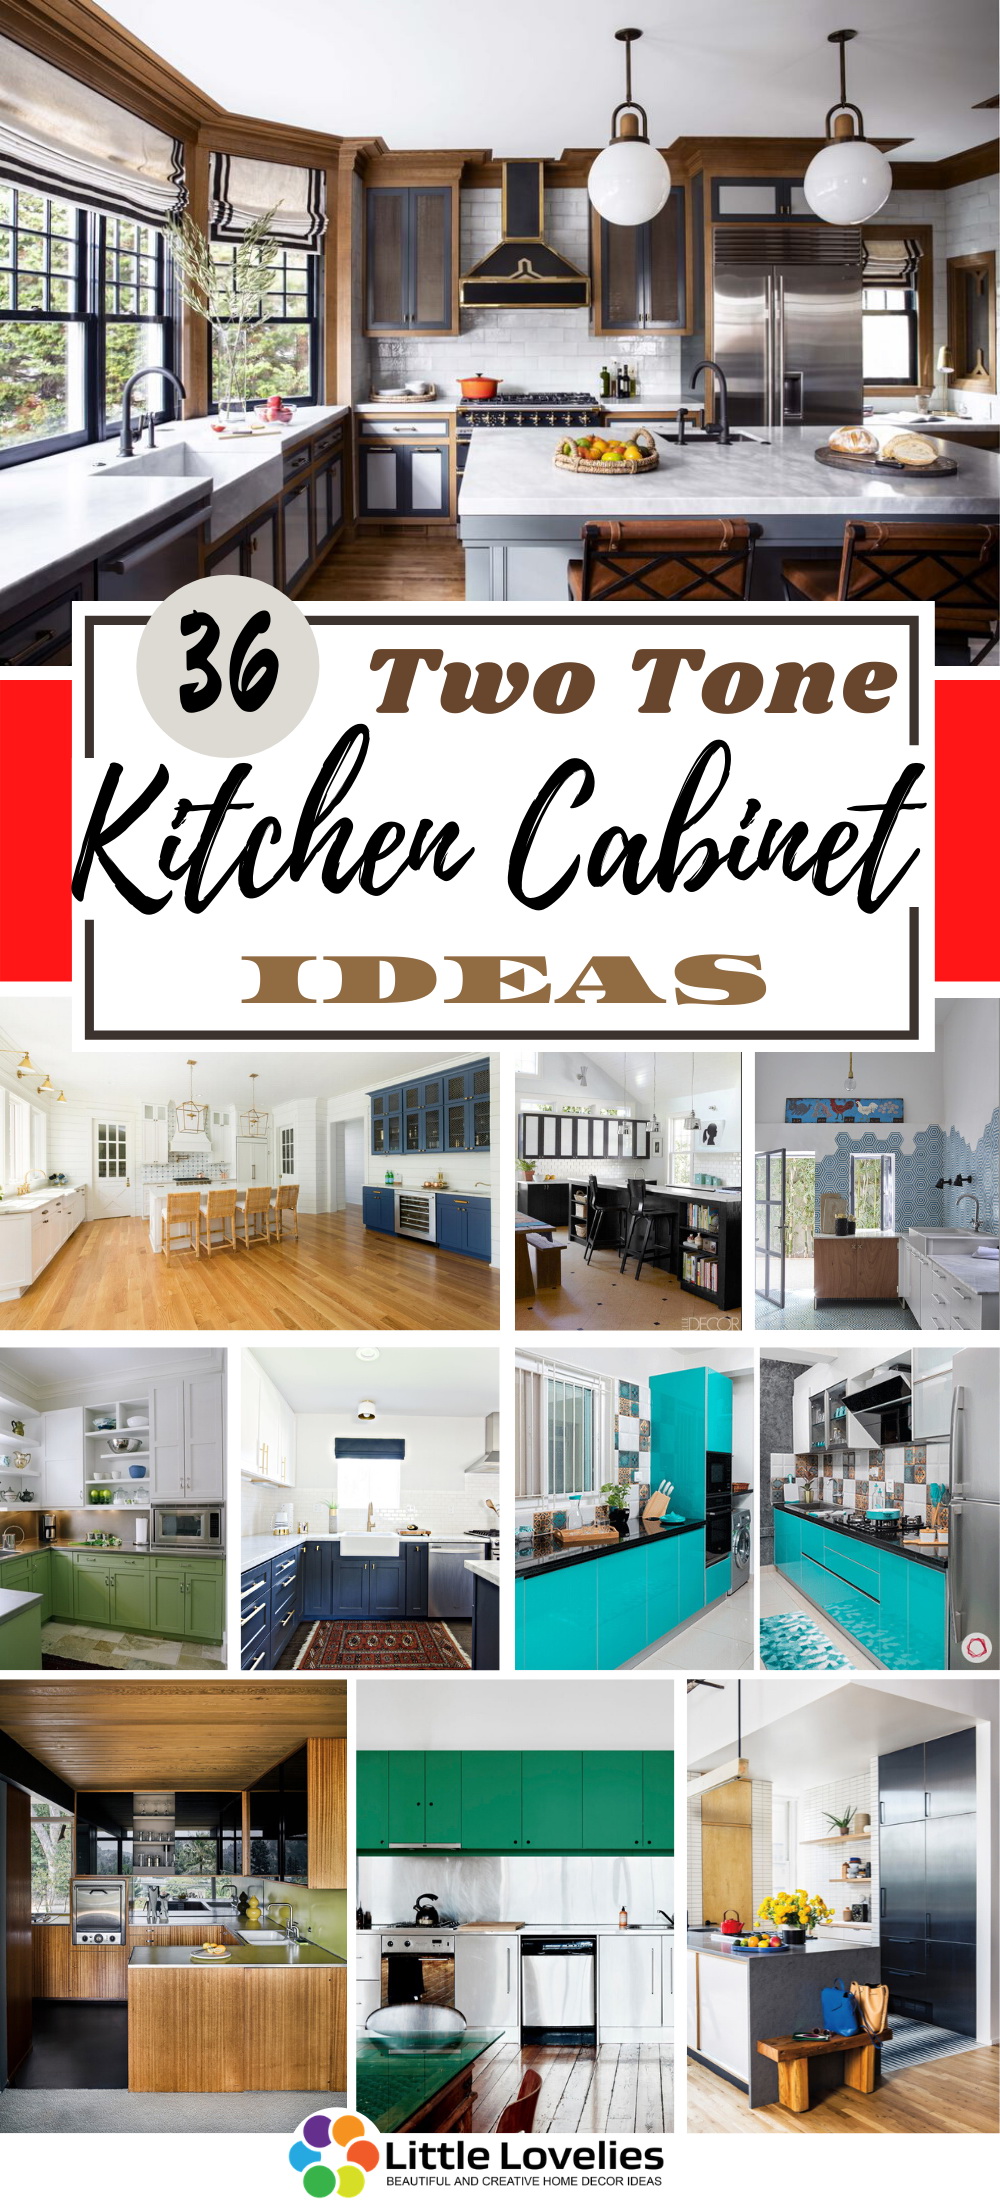 18 Fabulous Two Tone Kitchen Cabinet Ideas To Bring Colour In Your ...